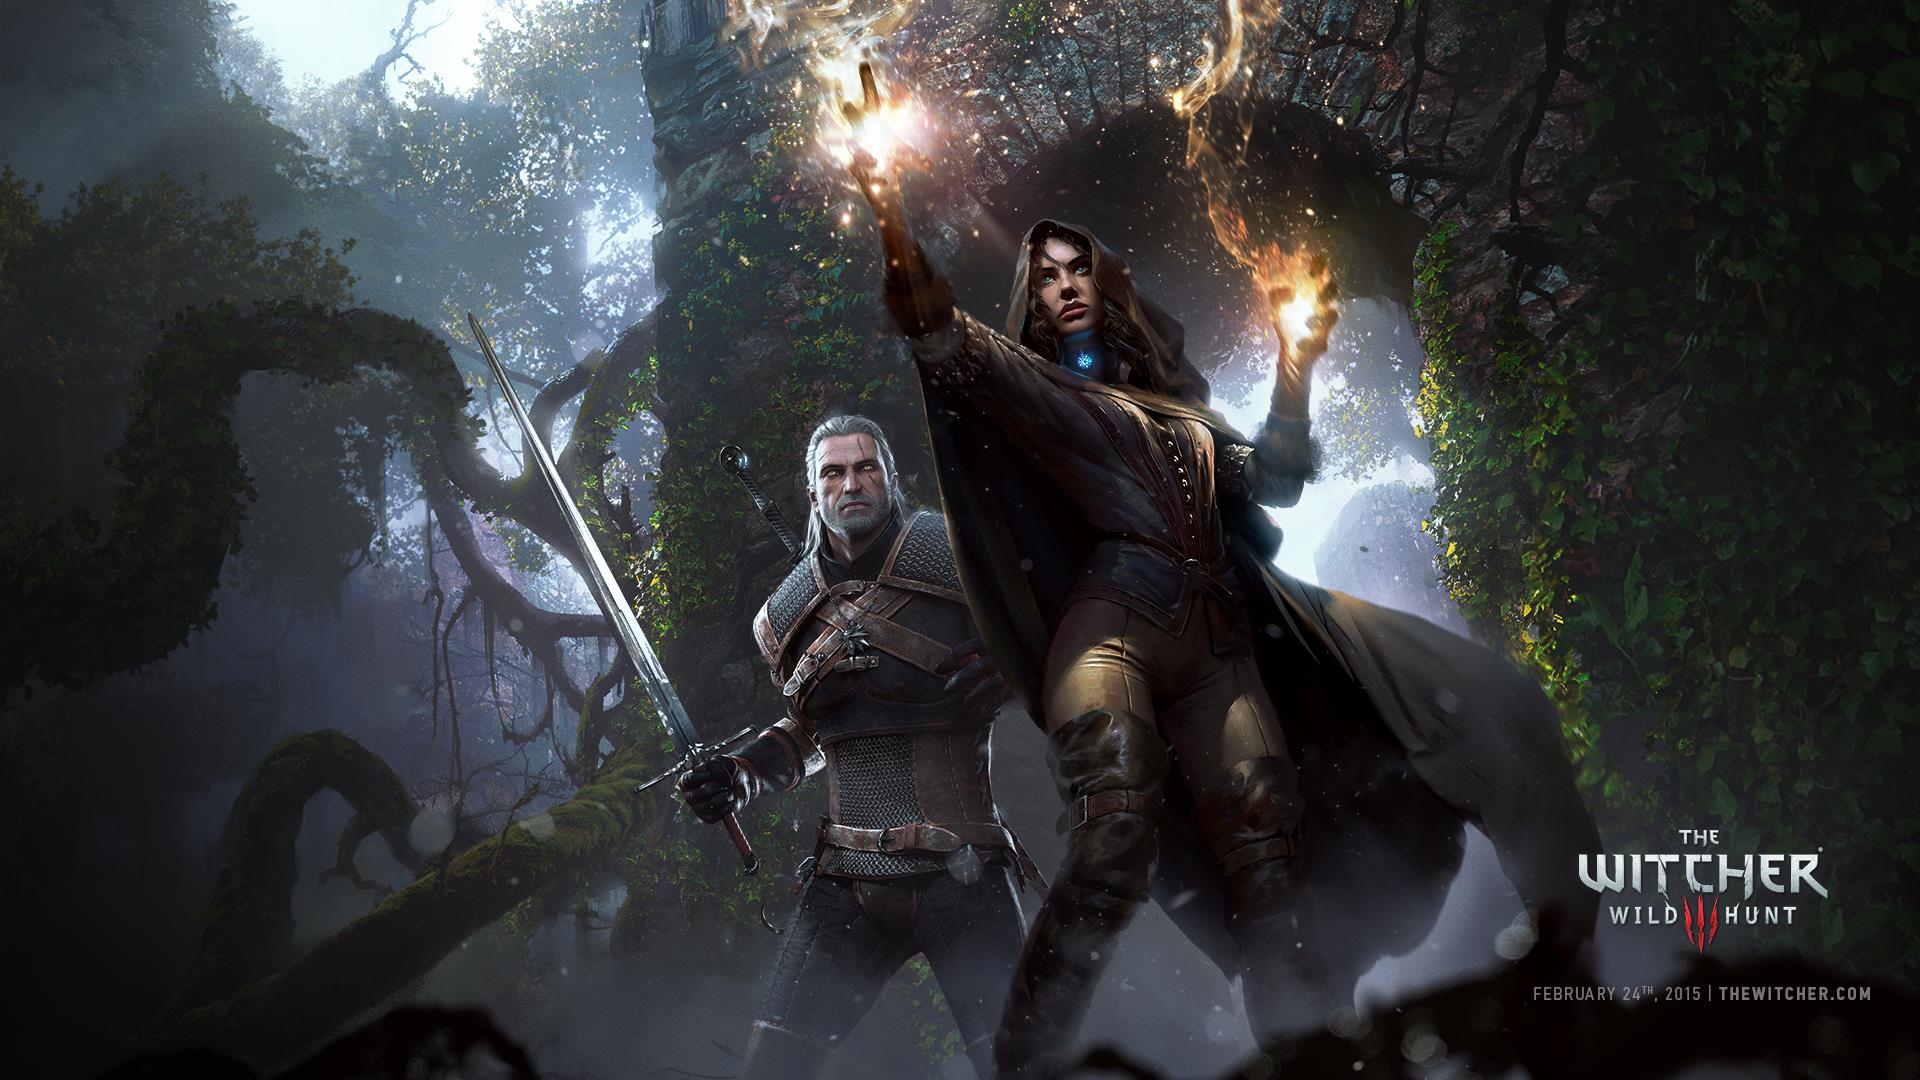 The Witcher Wild Hunt Will Be Available On Pc Playstation And